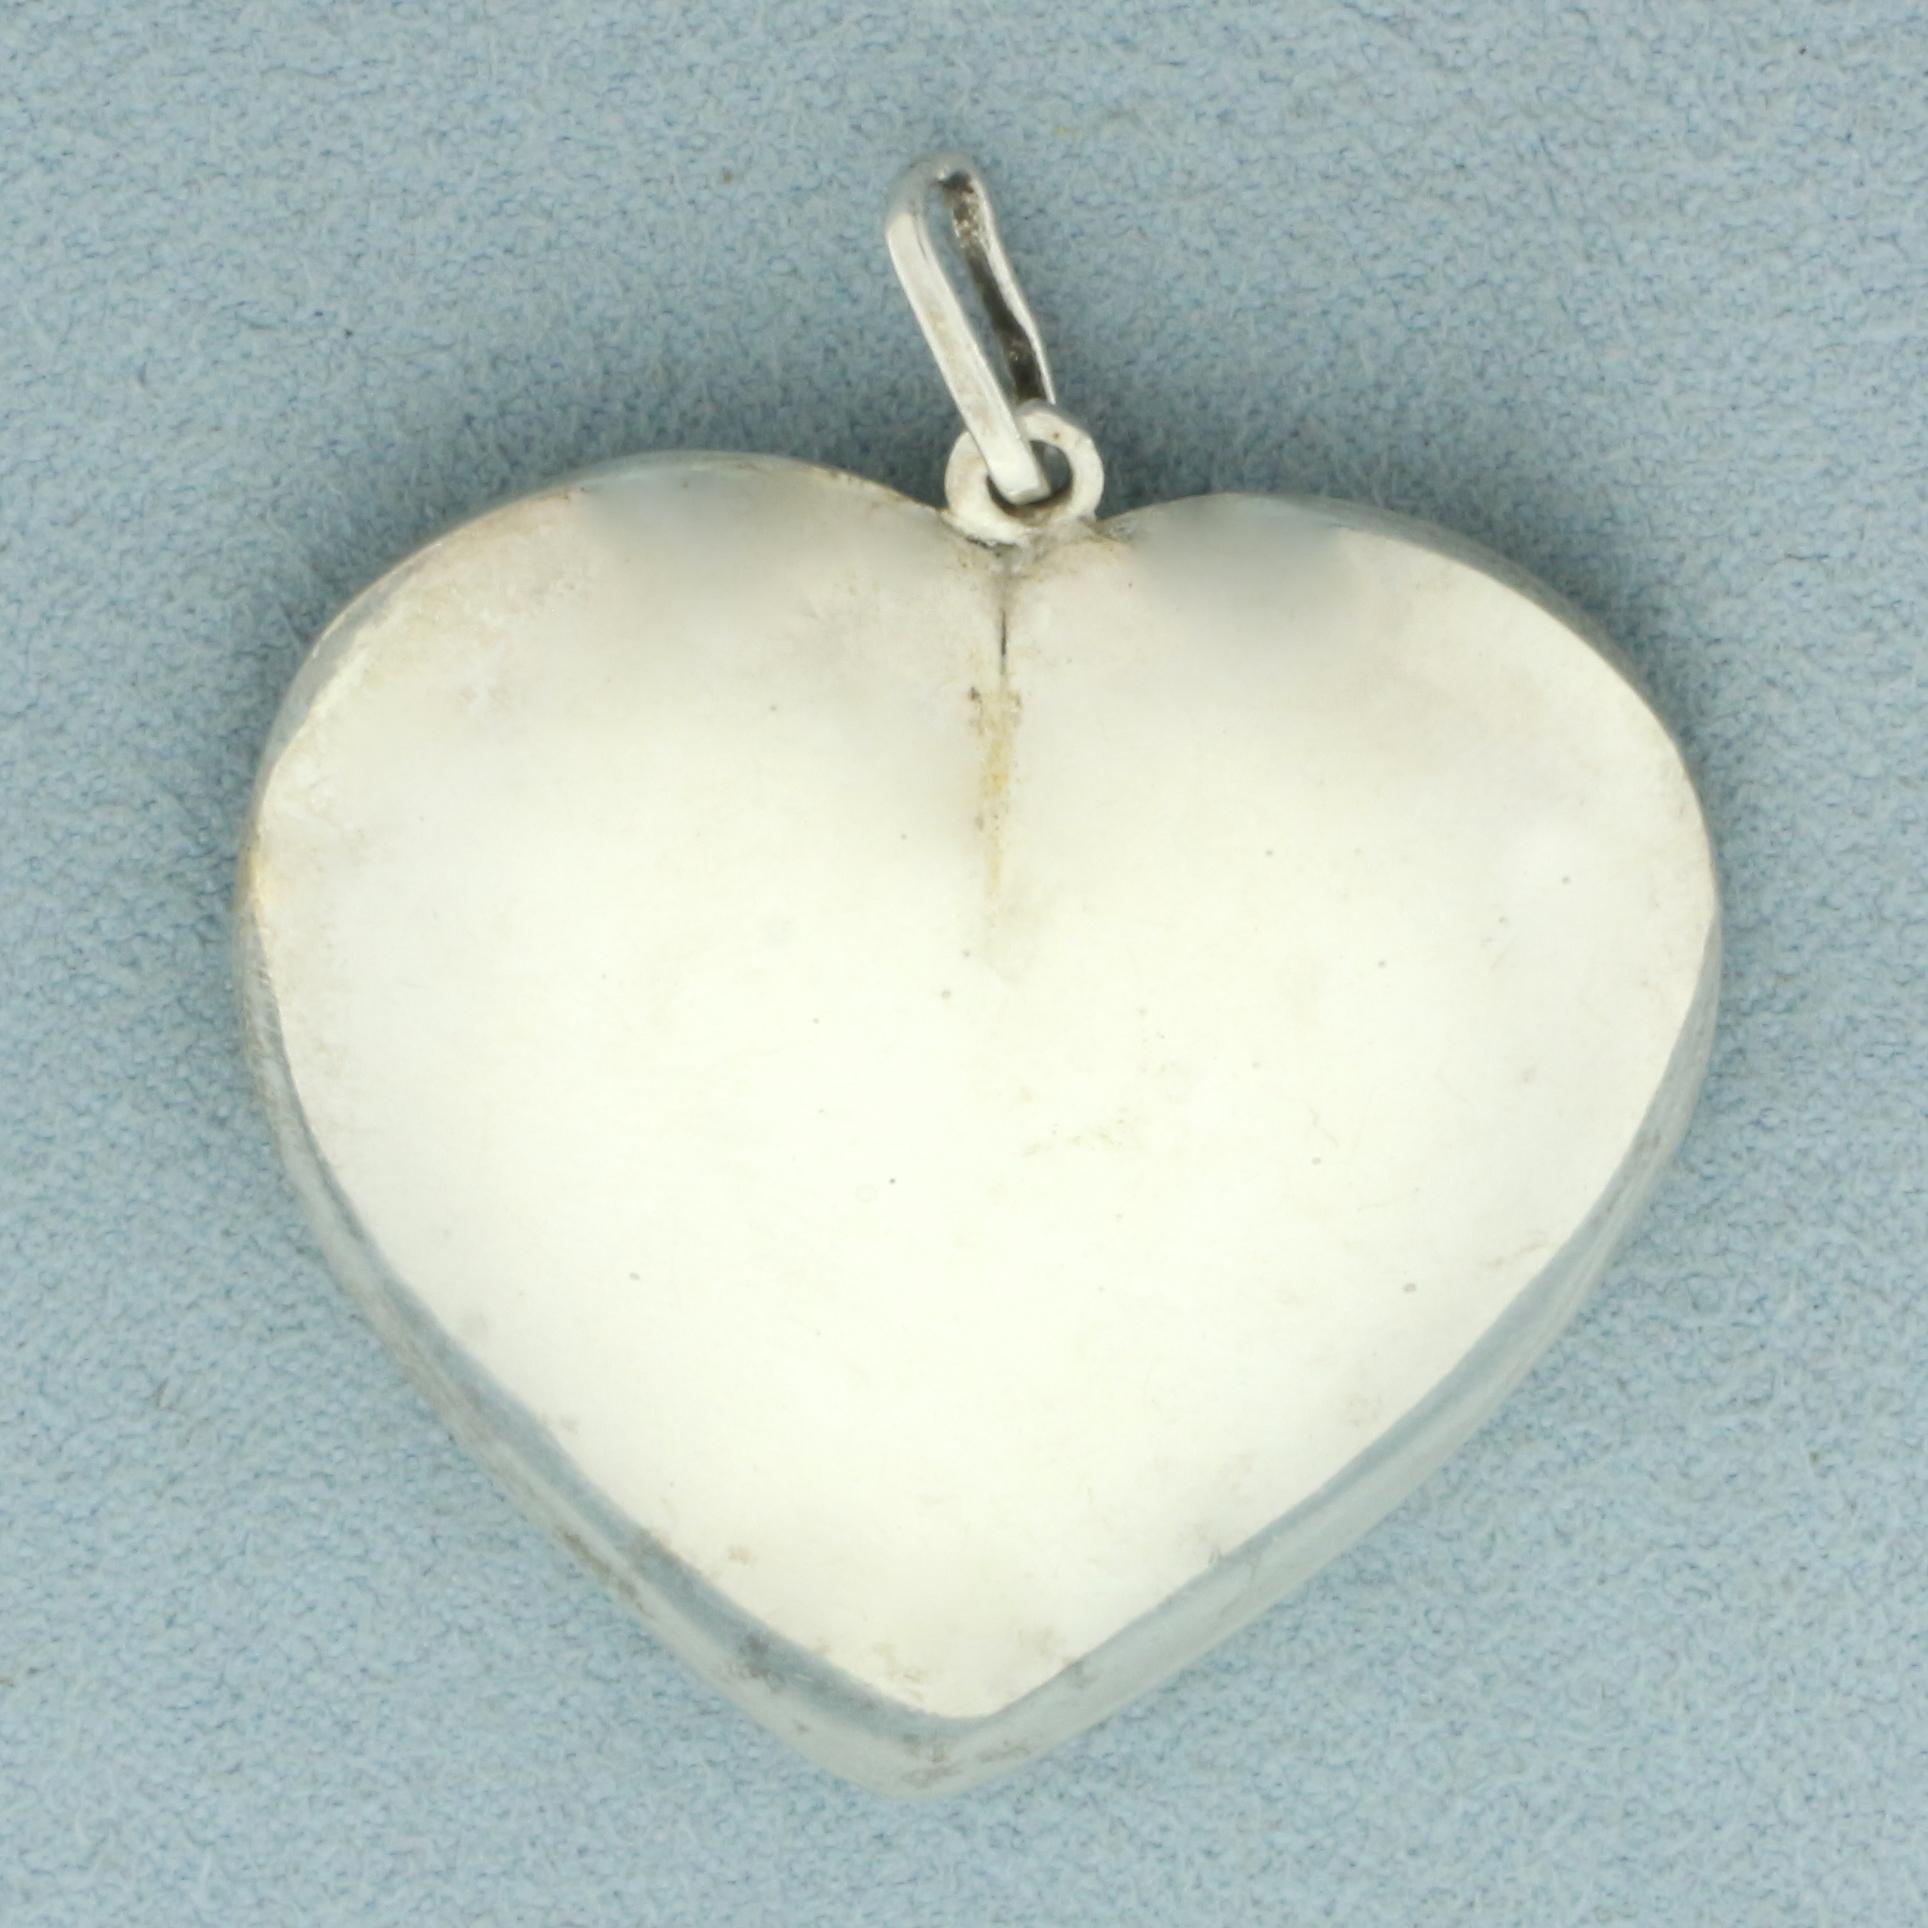 Large Puffy Heart Pendant In Sterling Silver